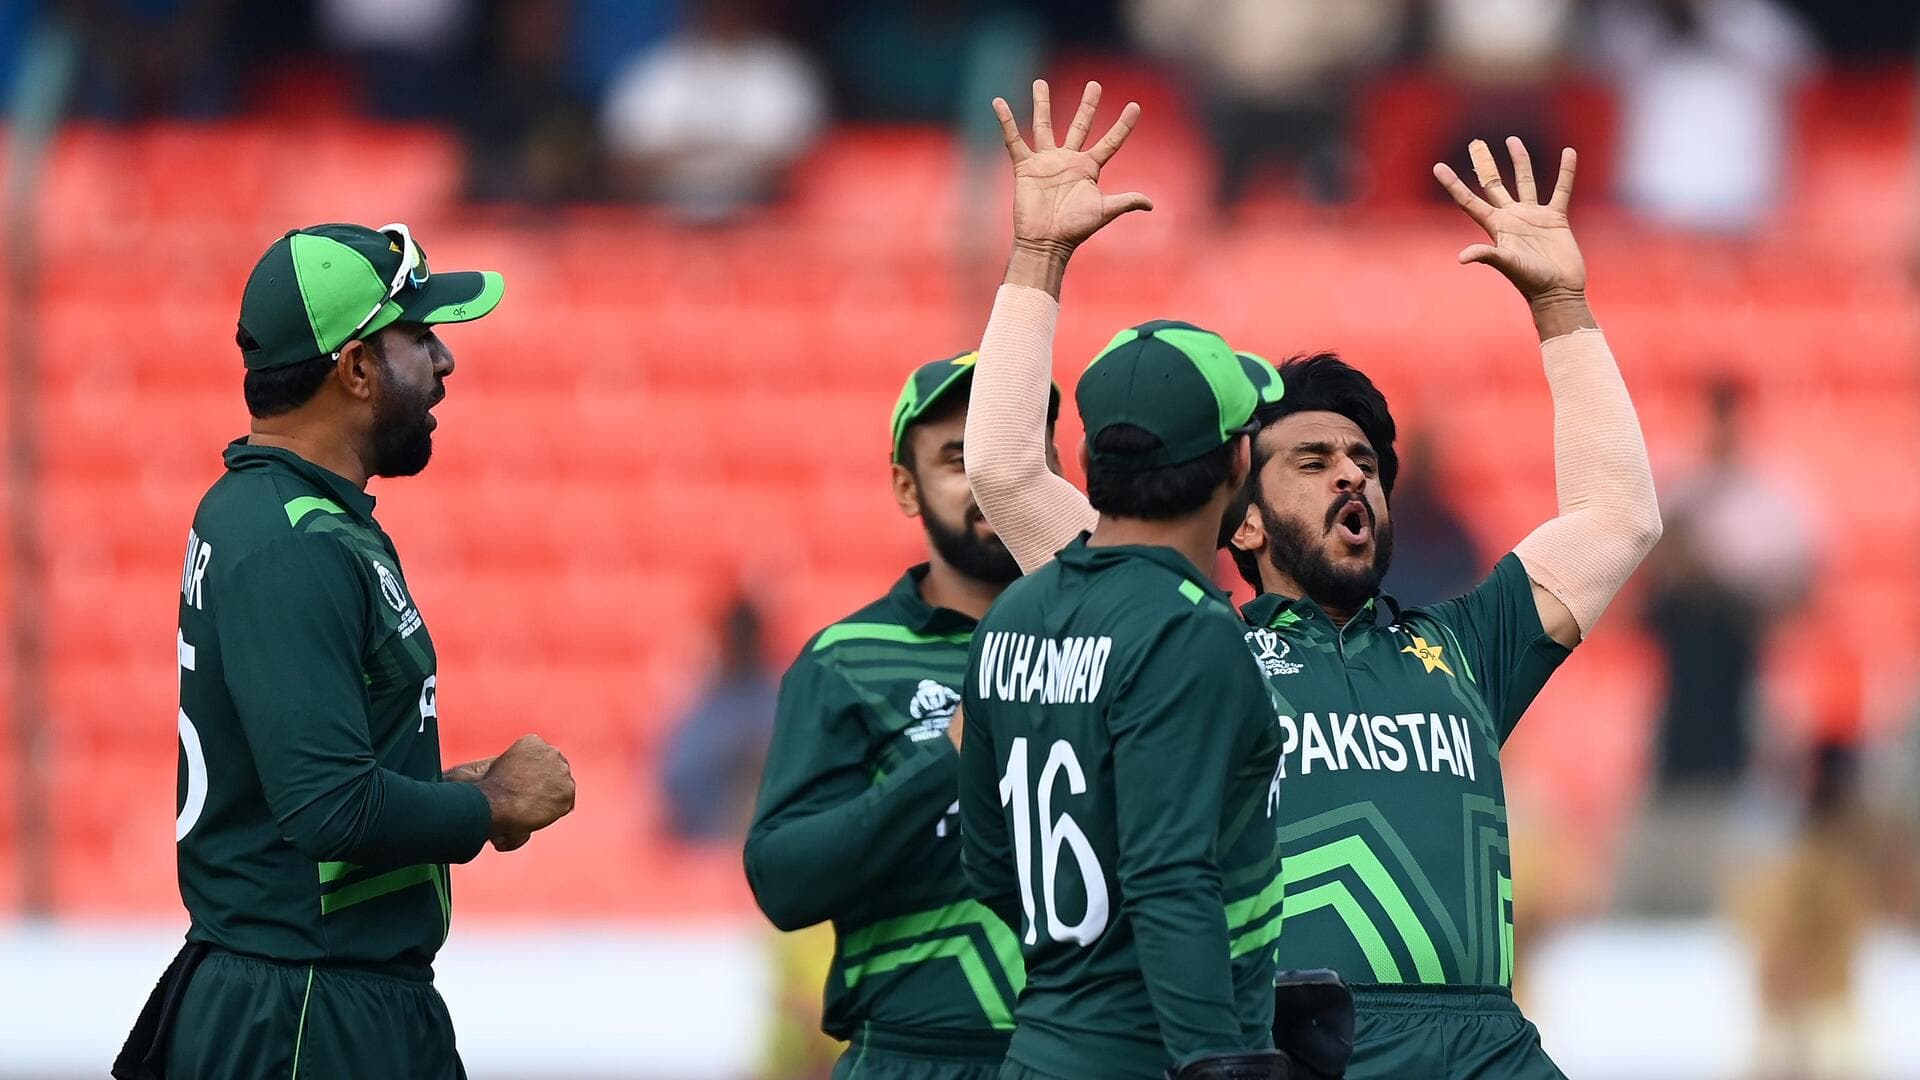 Hasan Ali completes 100 wickets in ODI cricket: Stats 